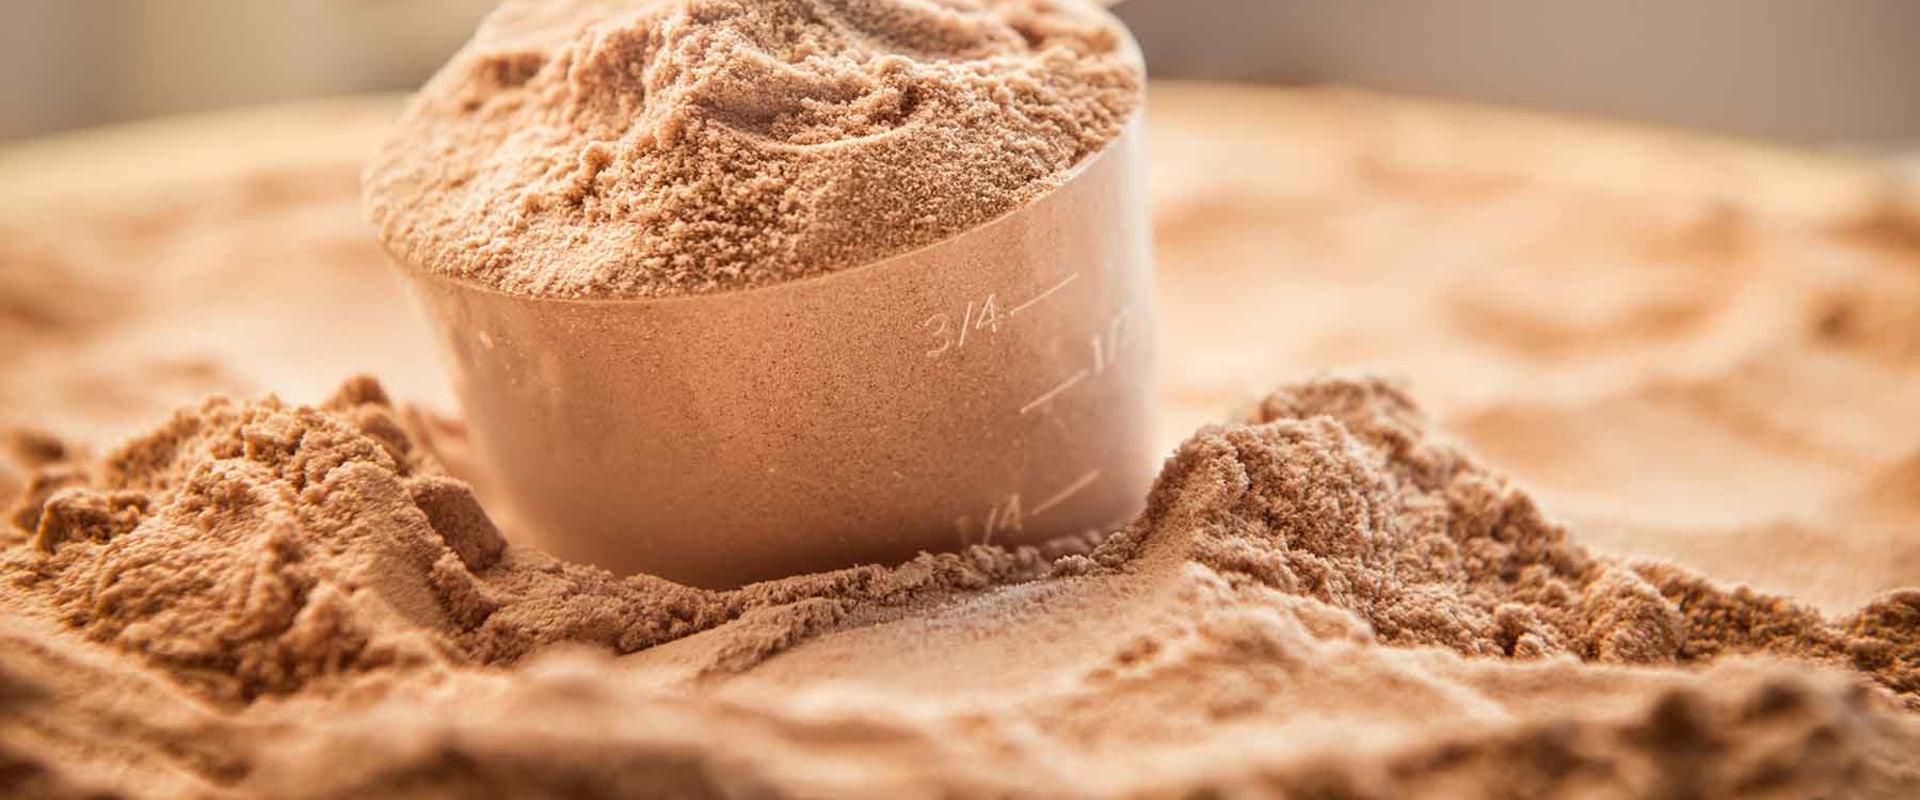 Is taking protein powder good for you?